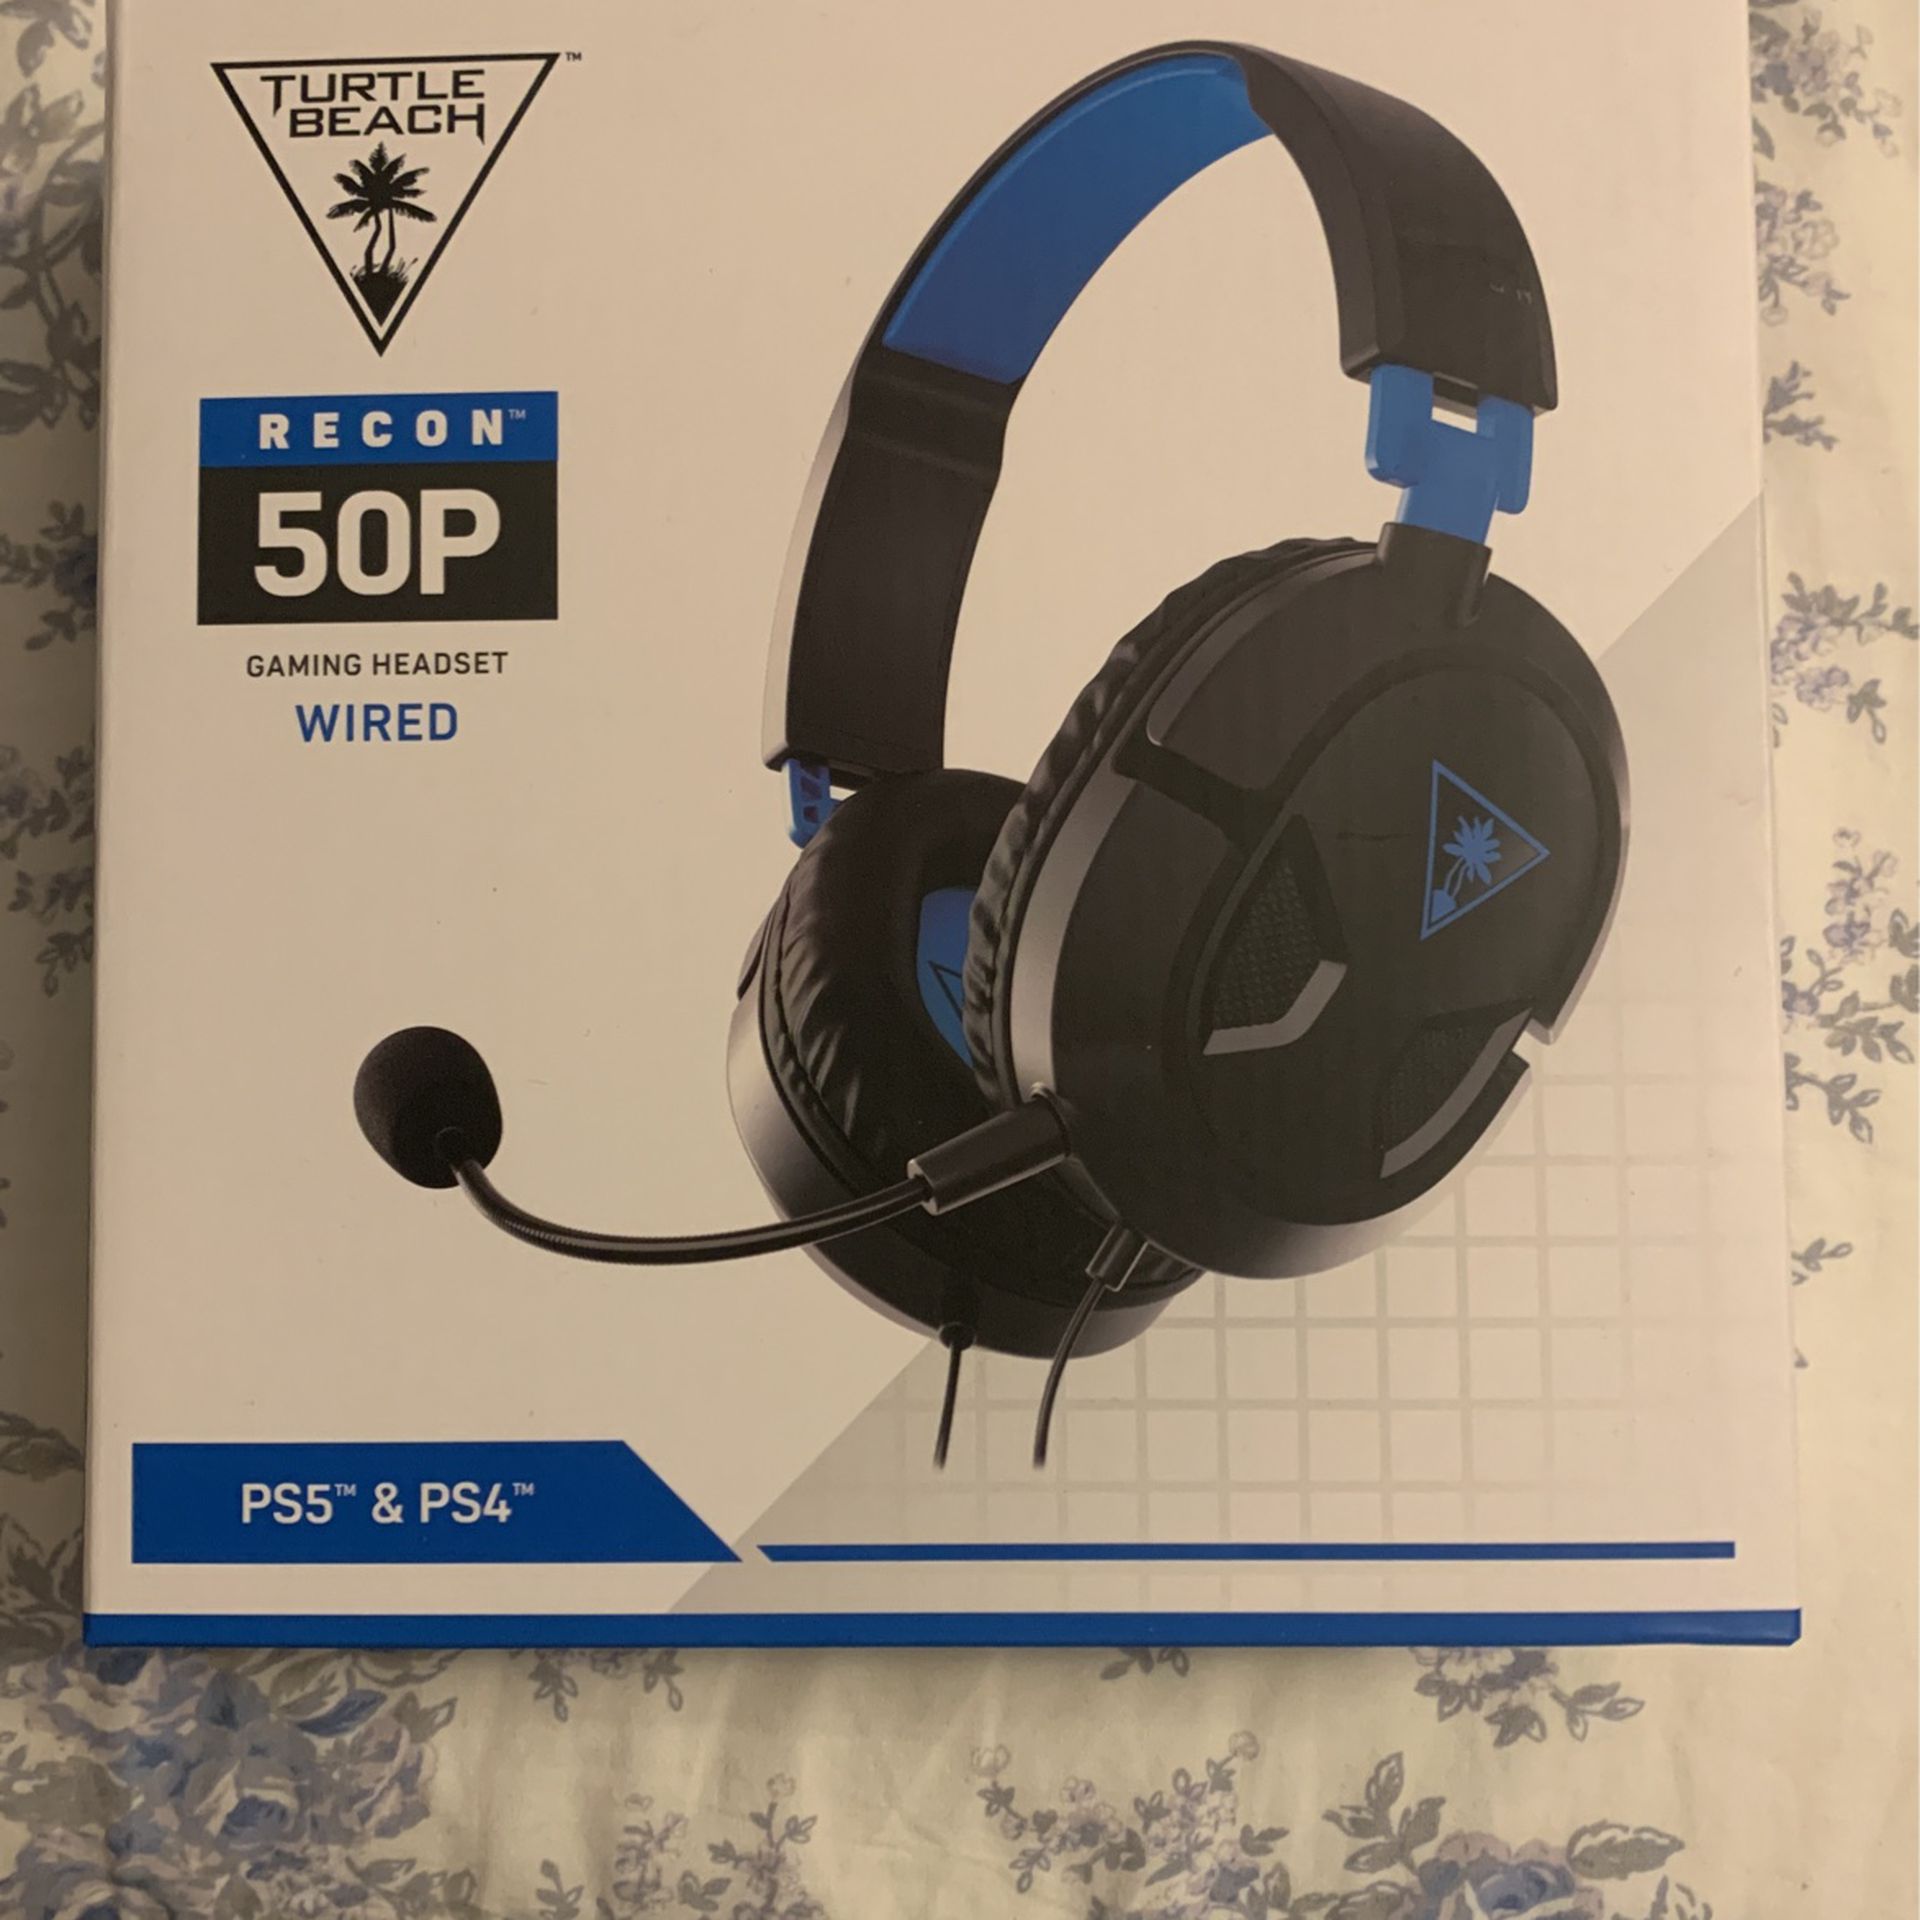 Gaming headset for ps4 and ps5